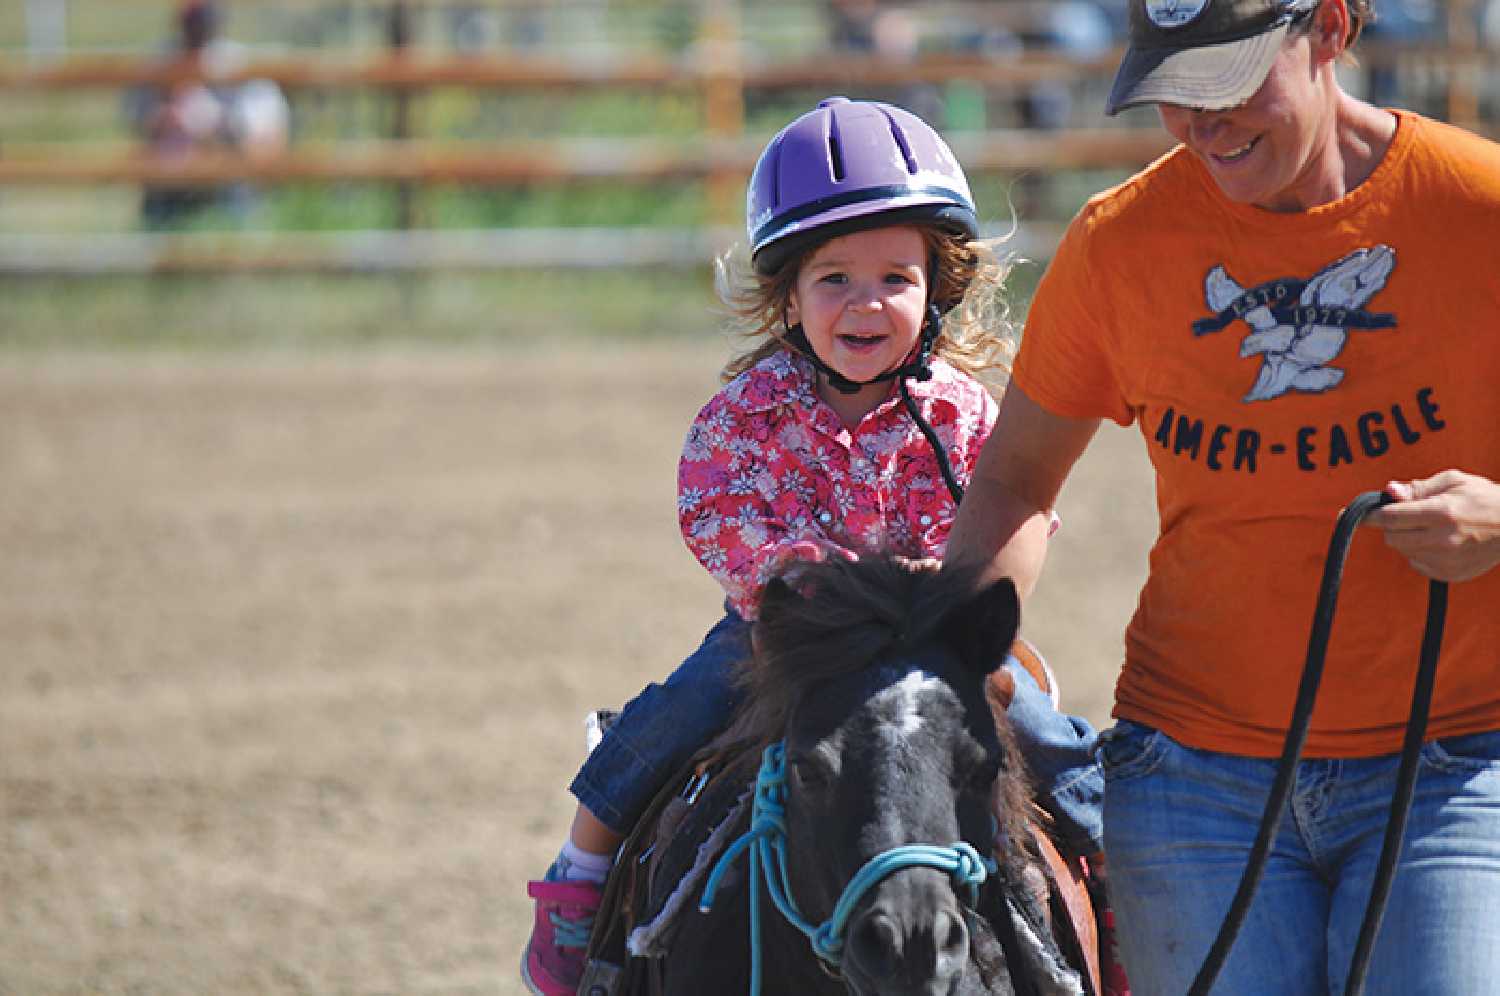 Being a great success last year, the Spy Hill and District Community Club will be having a kids rodeo on both days of their community Sports Days weekend.